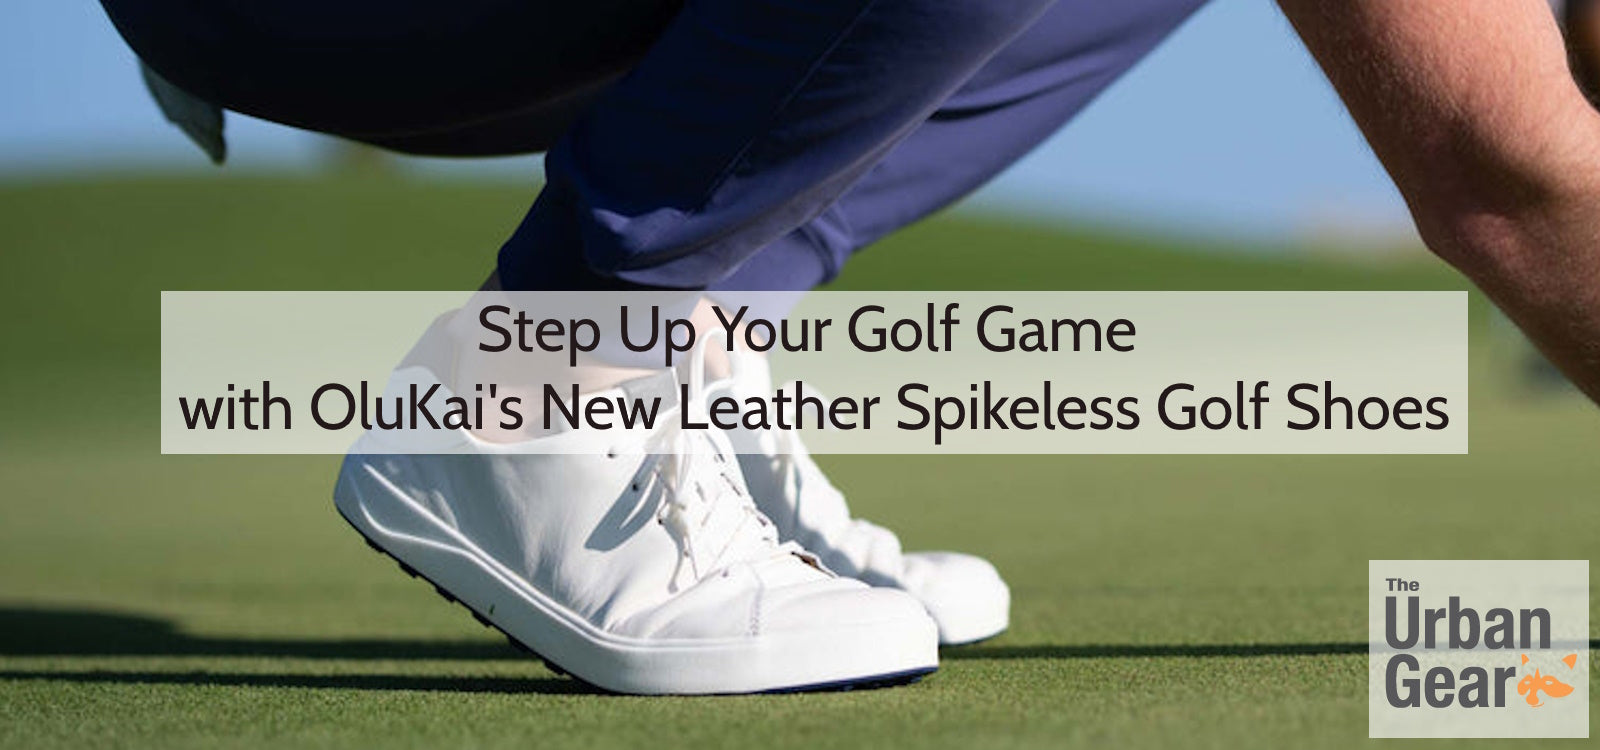 Step Up Your Golf Game with OluKai's New Leather Spikeless Golf Shoes